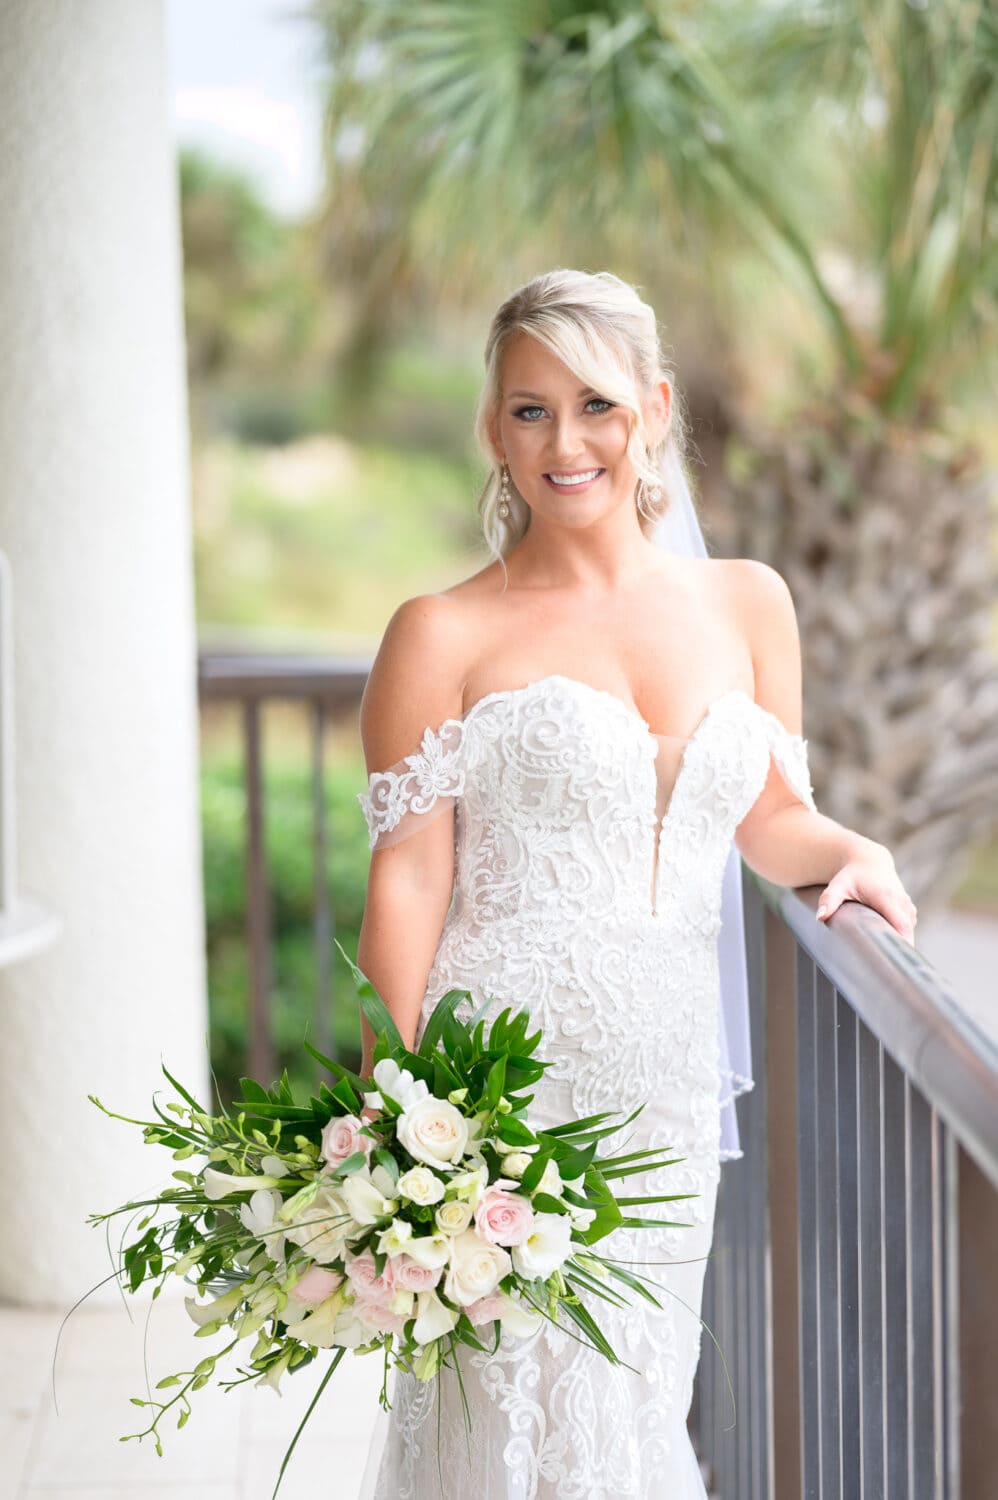 Bride before the ceremony on the balcony - Dunes Golf and Beach Club